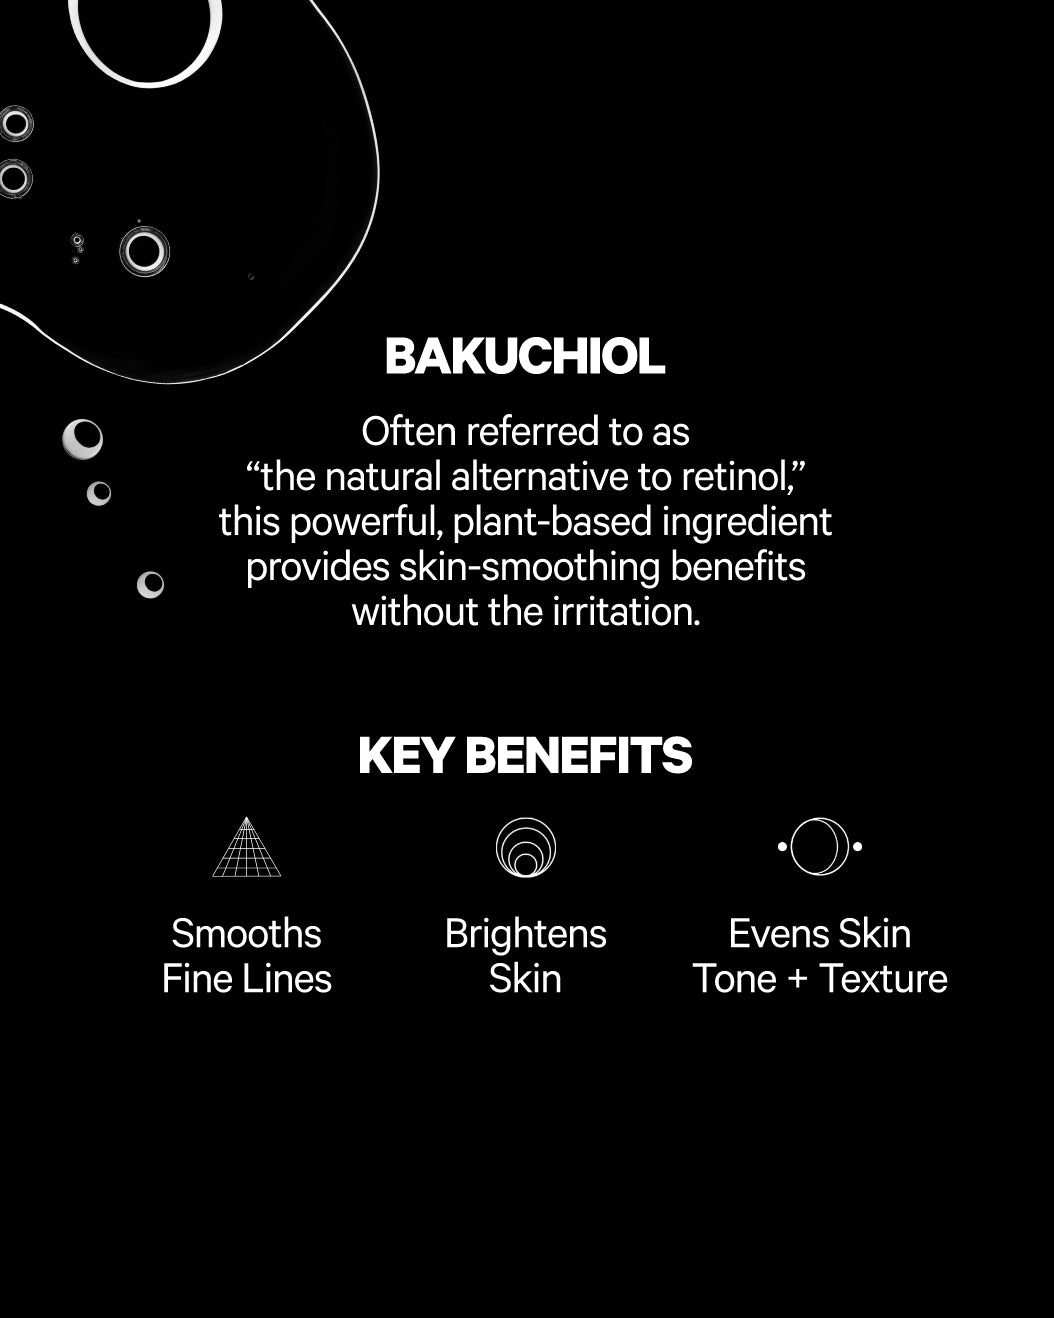 Bakuchiol infographic that reads: "BAKUCHIOL. Often referred to as 'the natural alternative to retinol,' this powerful, plant-based ingredient provides skin-smoothing benefits without the irritation."